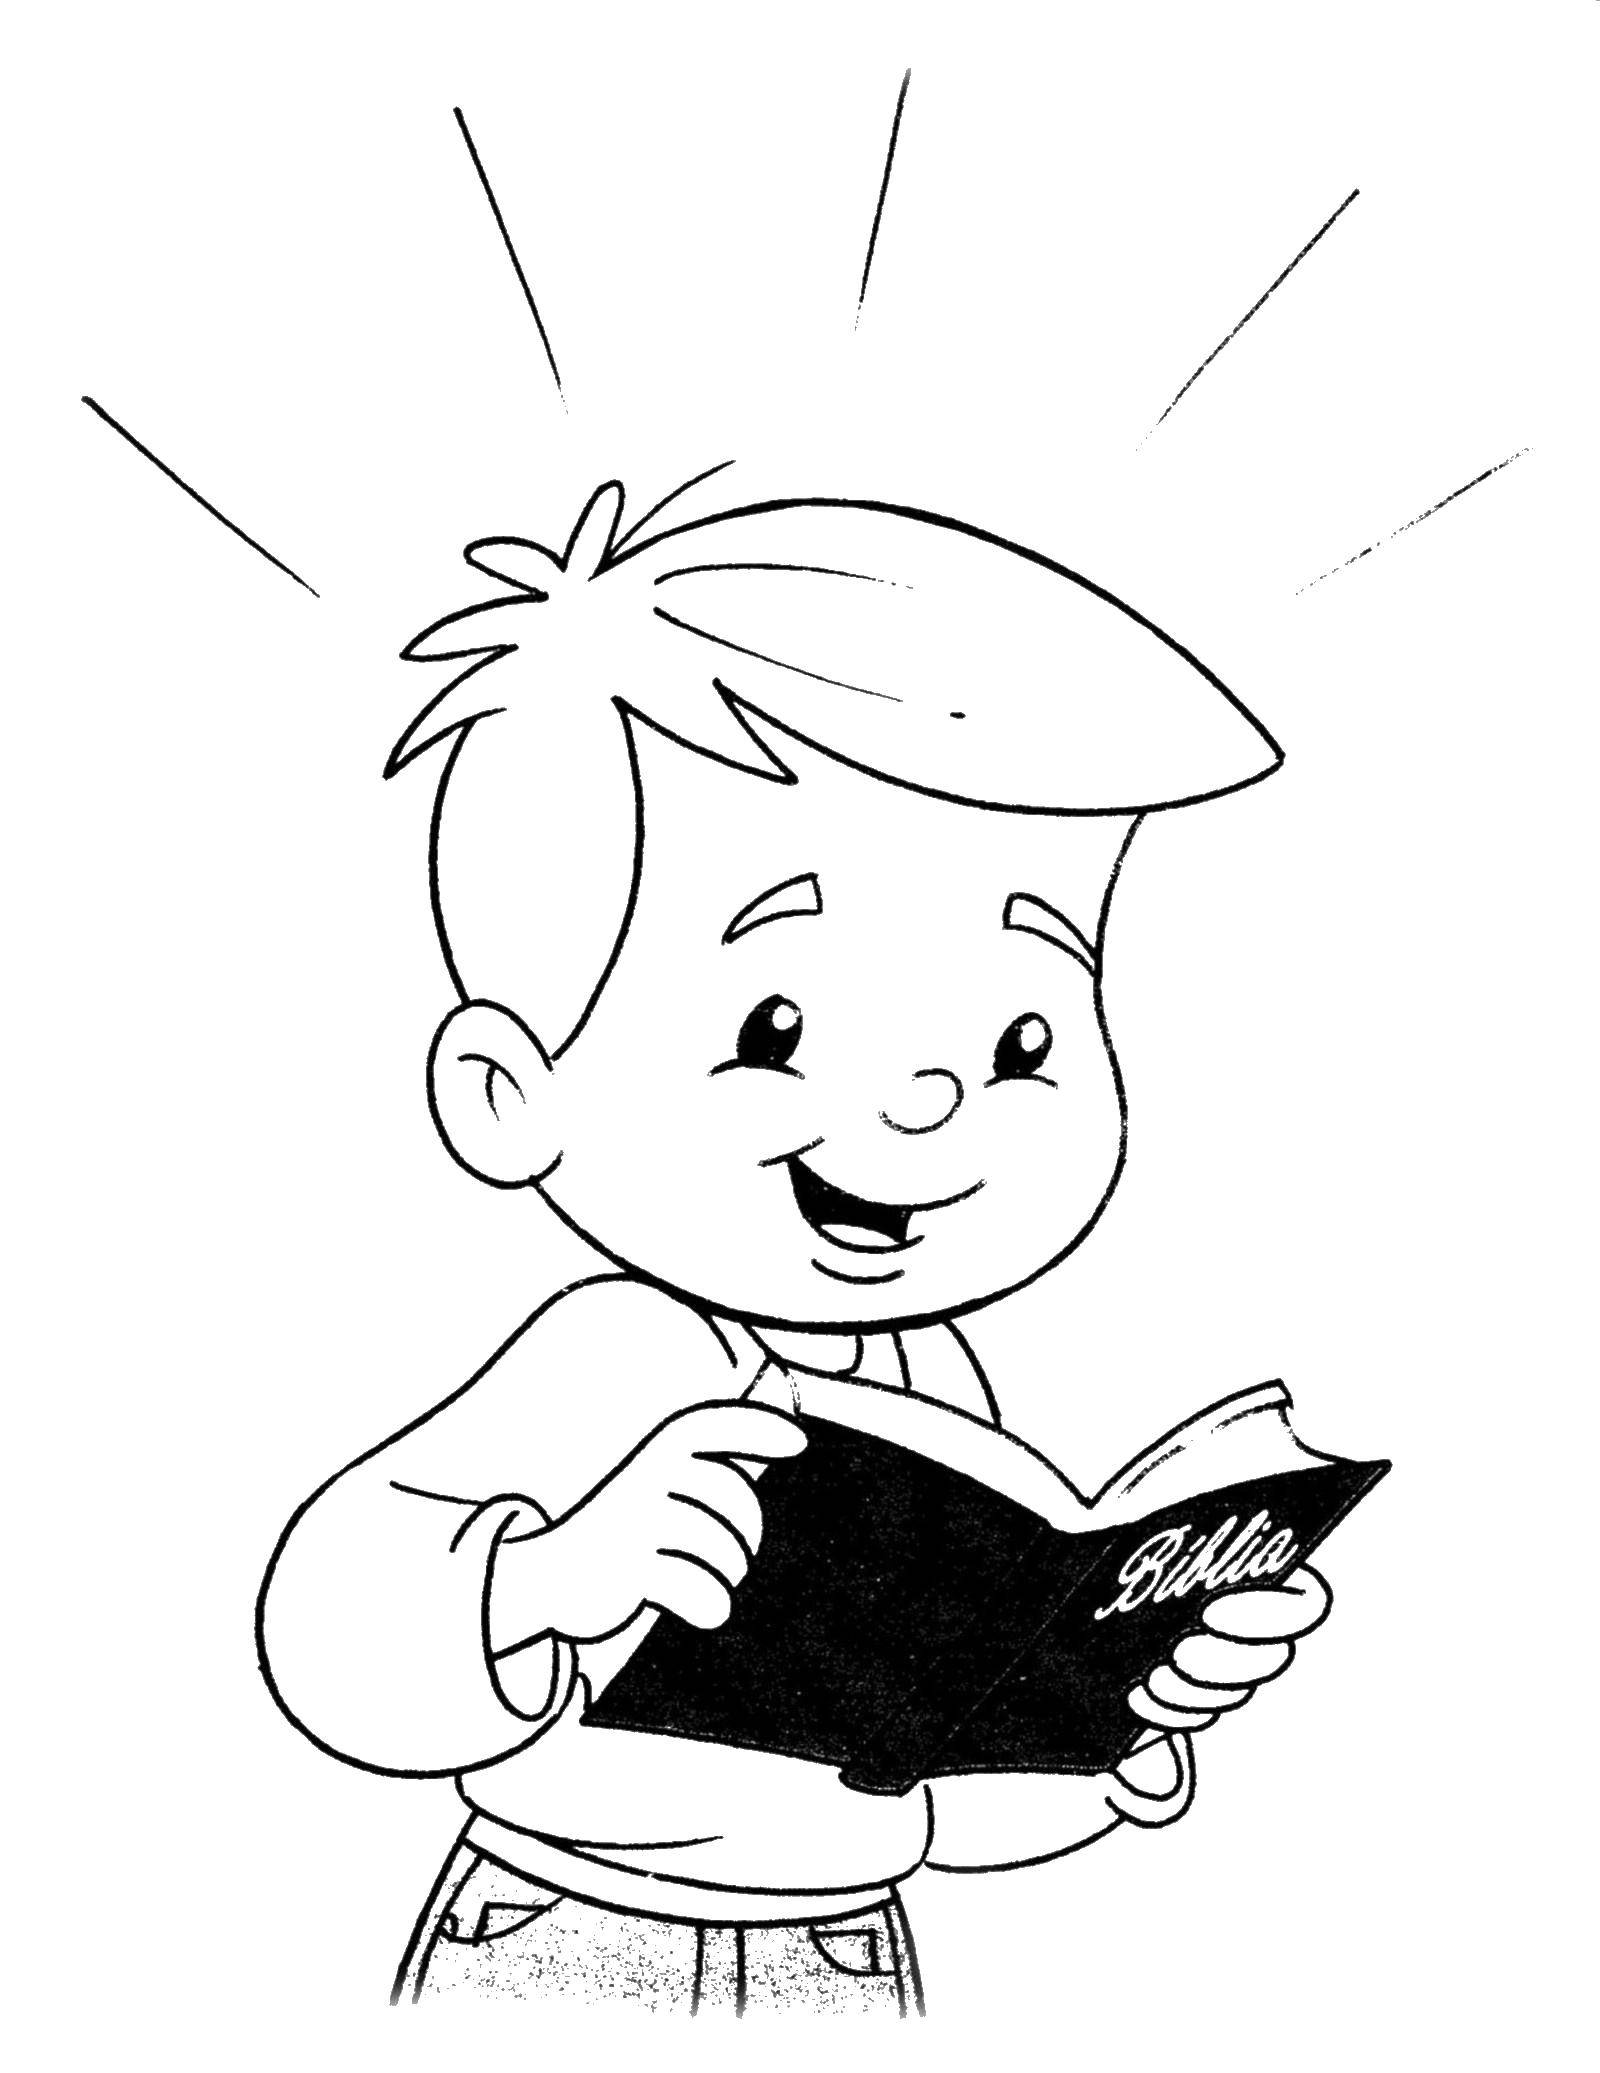 Coloring Boy with a Bible. Category the Bible. Tags:  the Bible, boy.